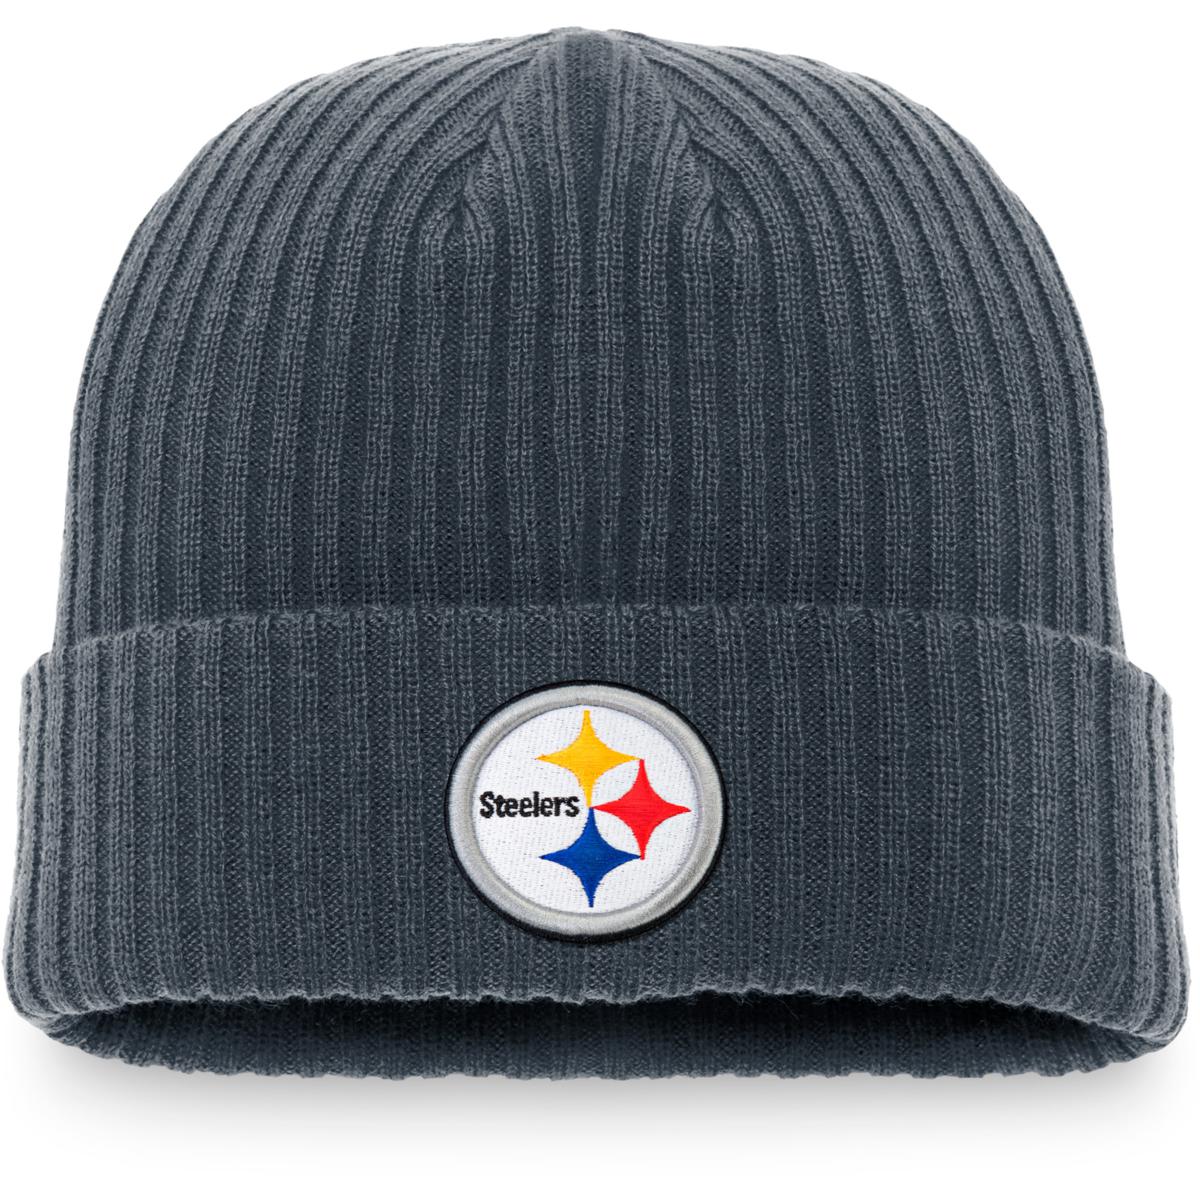 pittsburgh steelers stocking hat